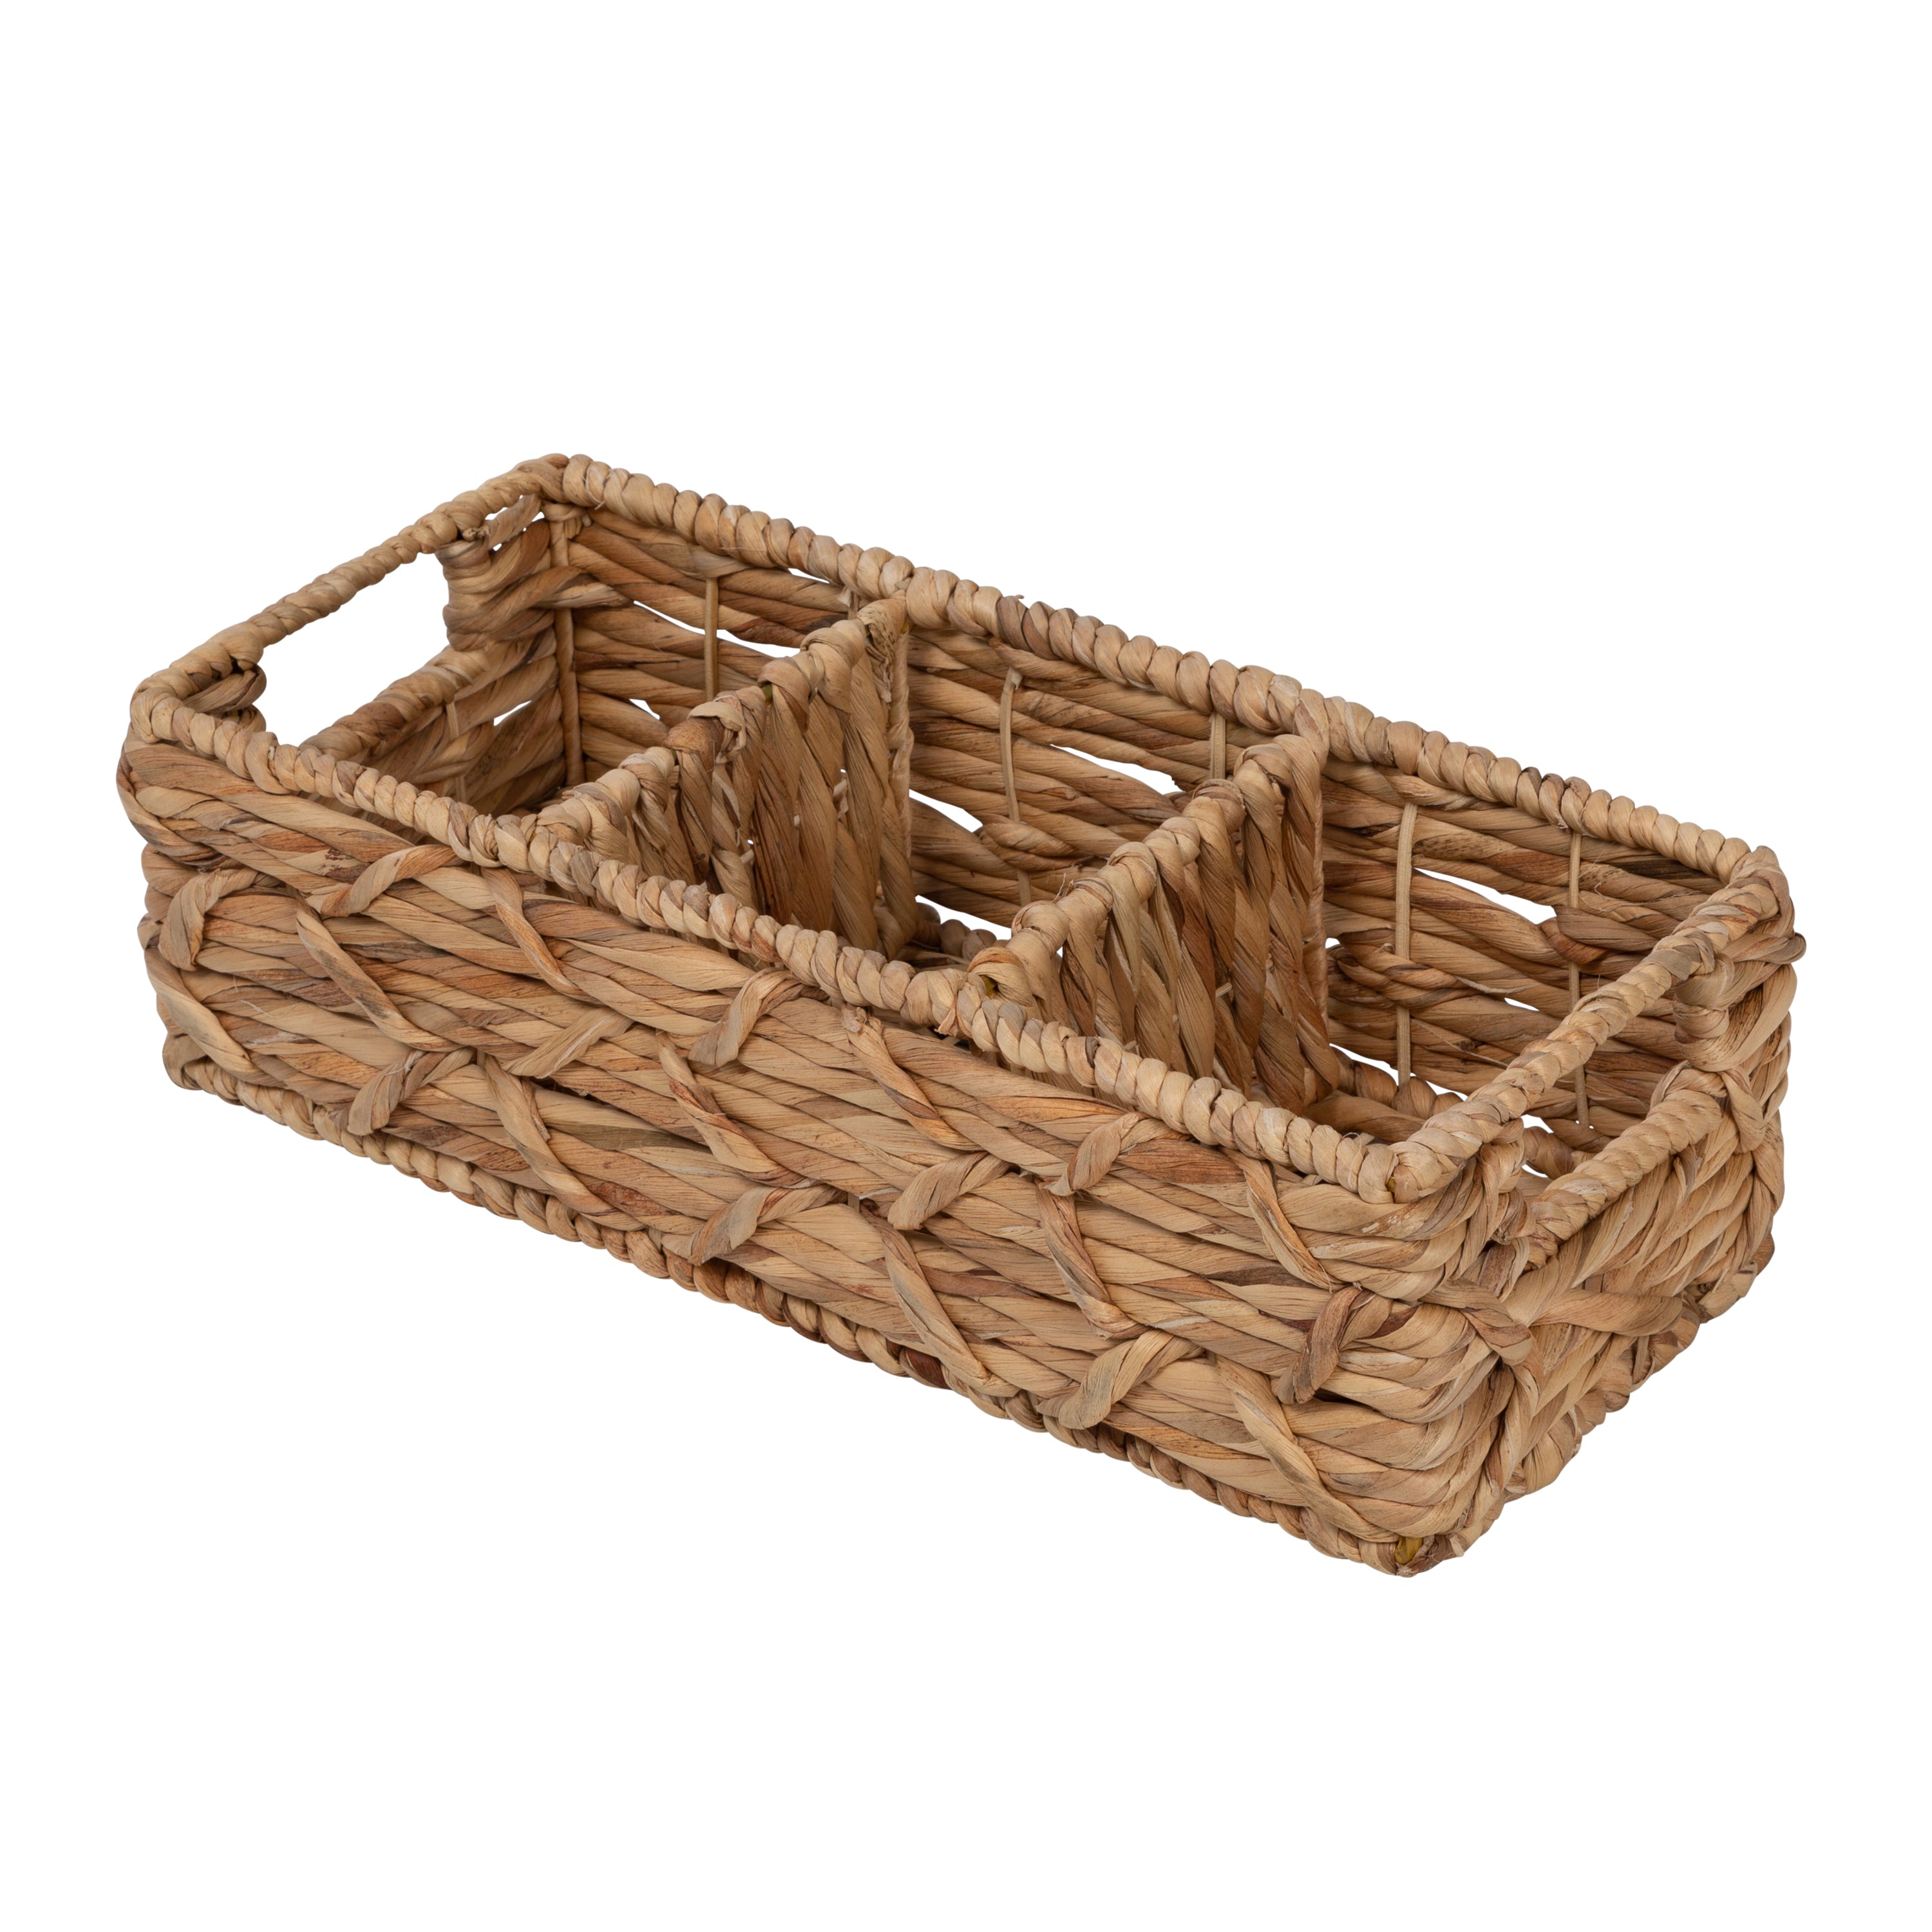 Organizer For Cosmetics 3 Sections Wicker Baskets for Shelves Hand-Woven Storage  Baskets Bathroom Organization Water Hyacinth